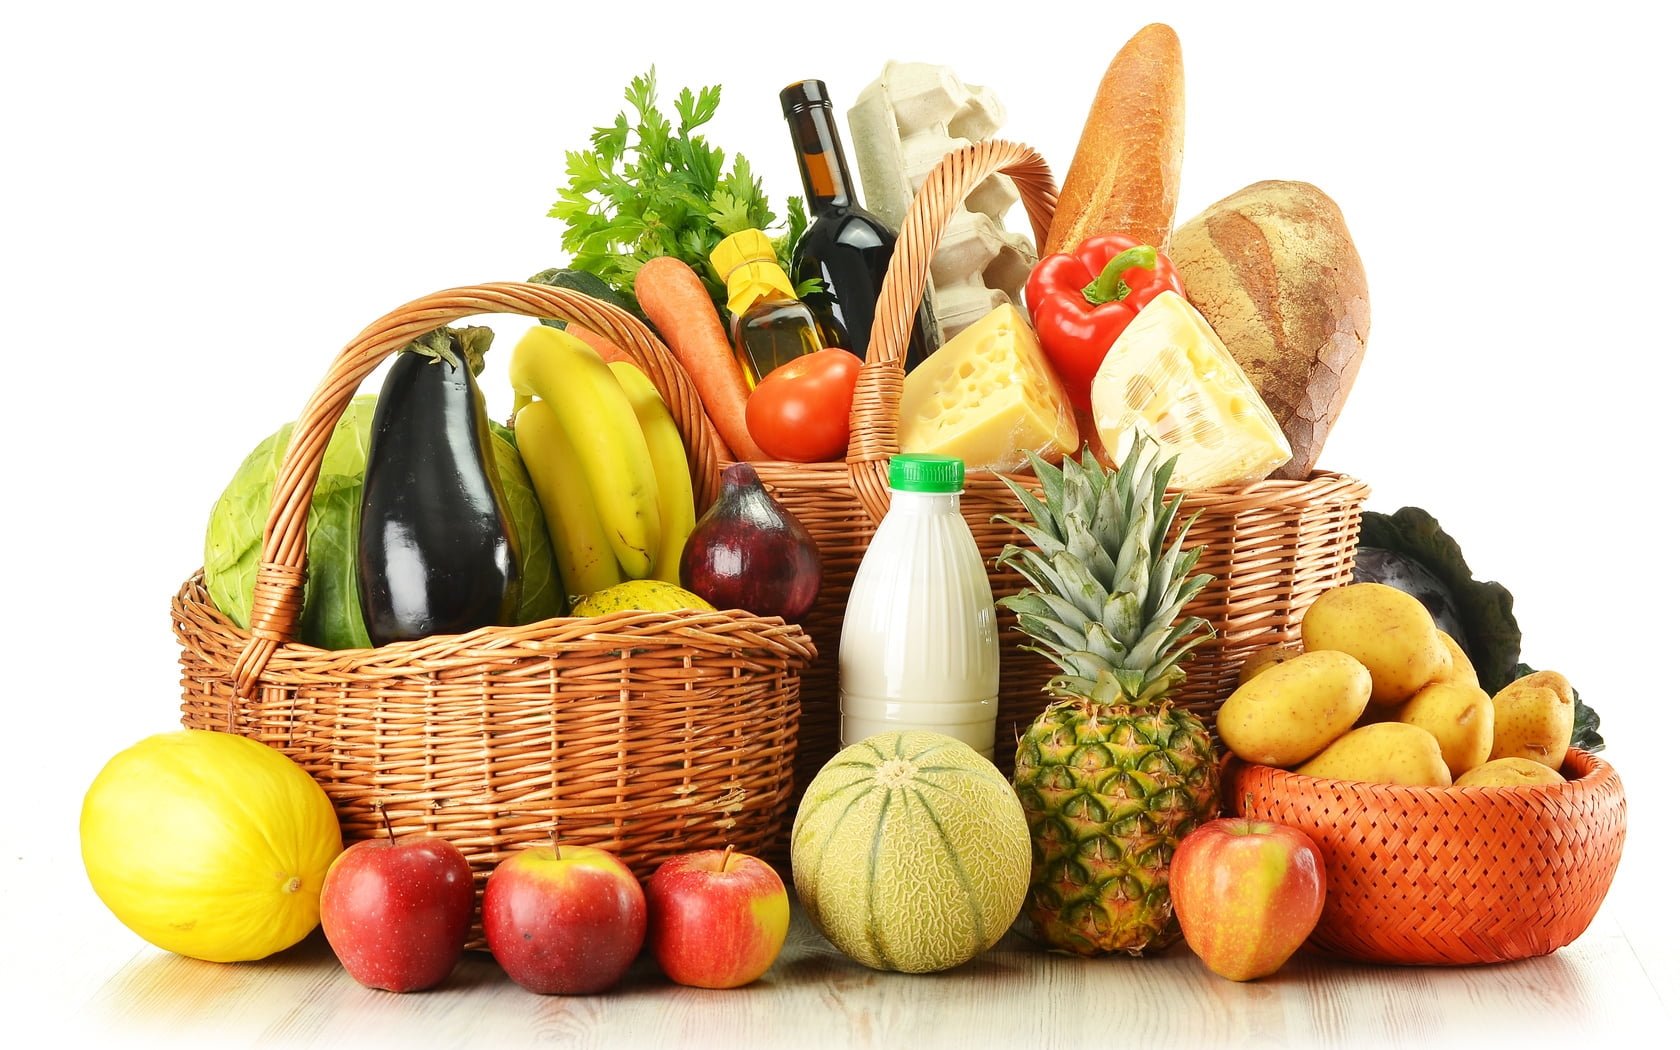 Assorted Fruits And Vegetables In Brown Wicker Basket HD Wallpaper